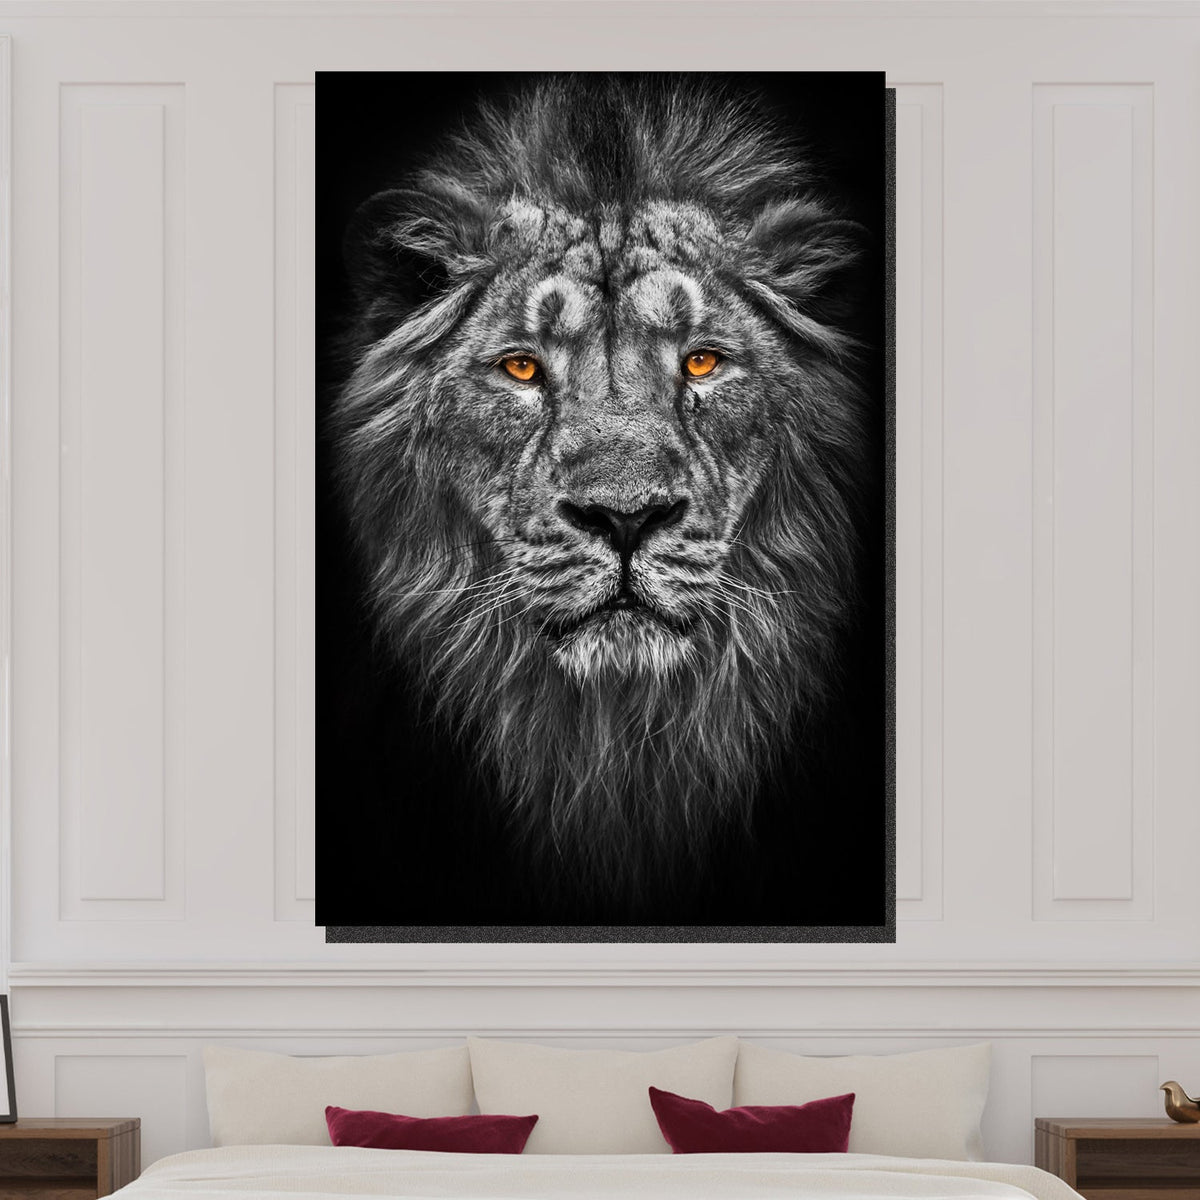 https://cdn.shopify.com/s/files/1/0387/9986/8044/products/LionwithOrangeEyesCanvasArtprintStretched-2.jpg